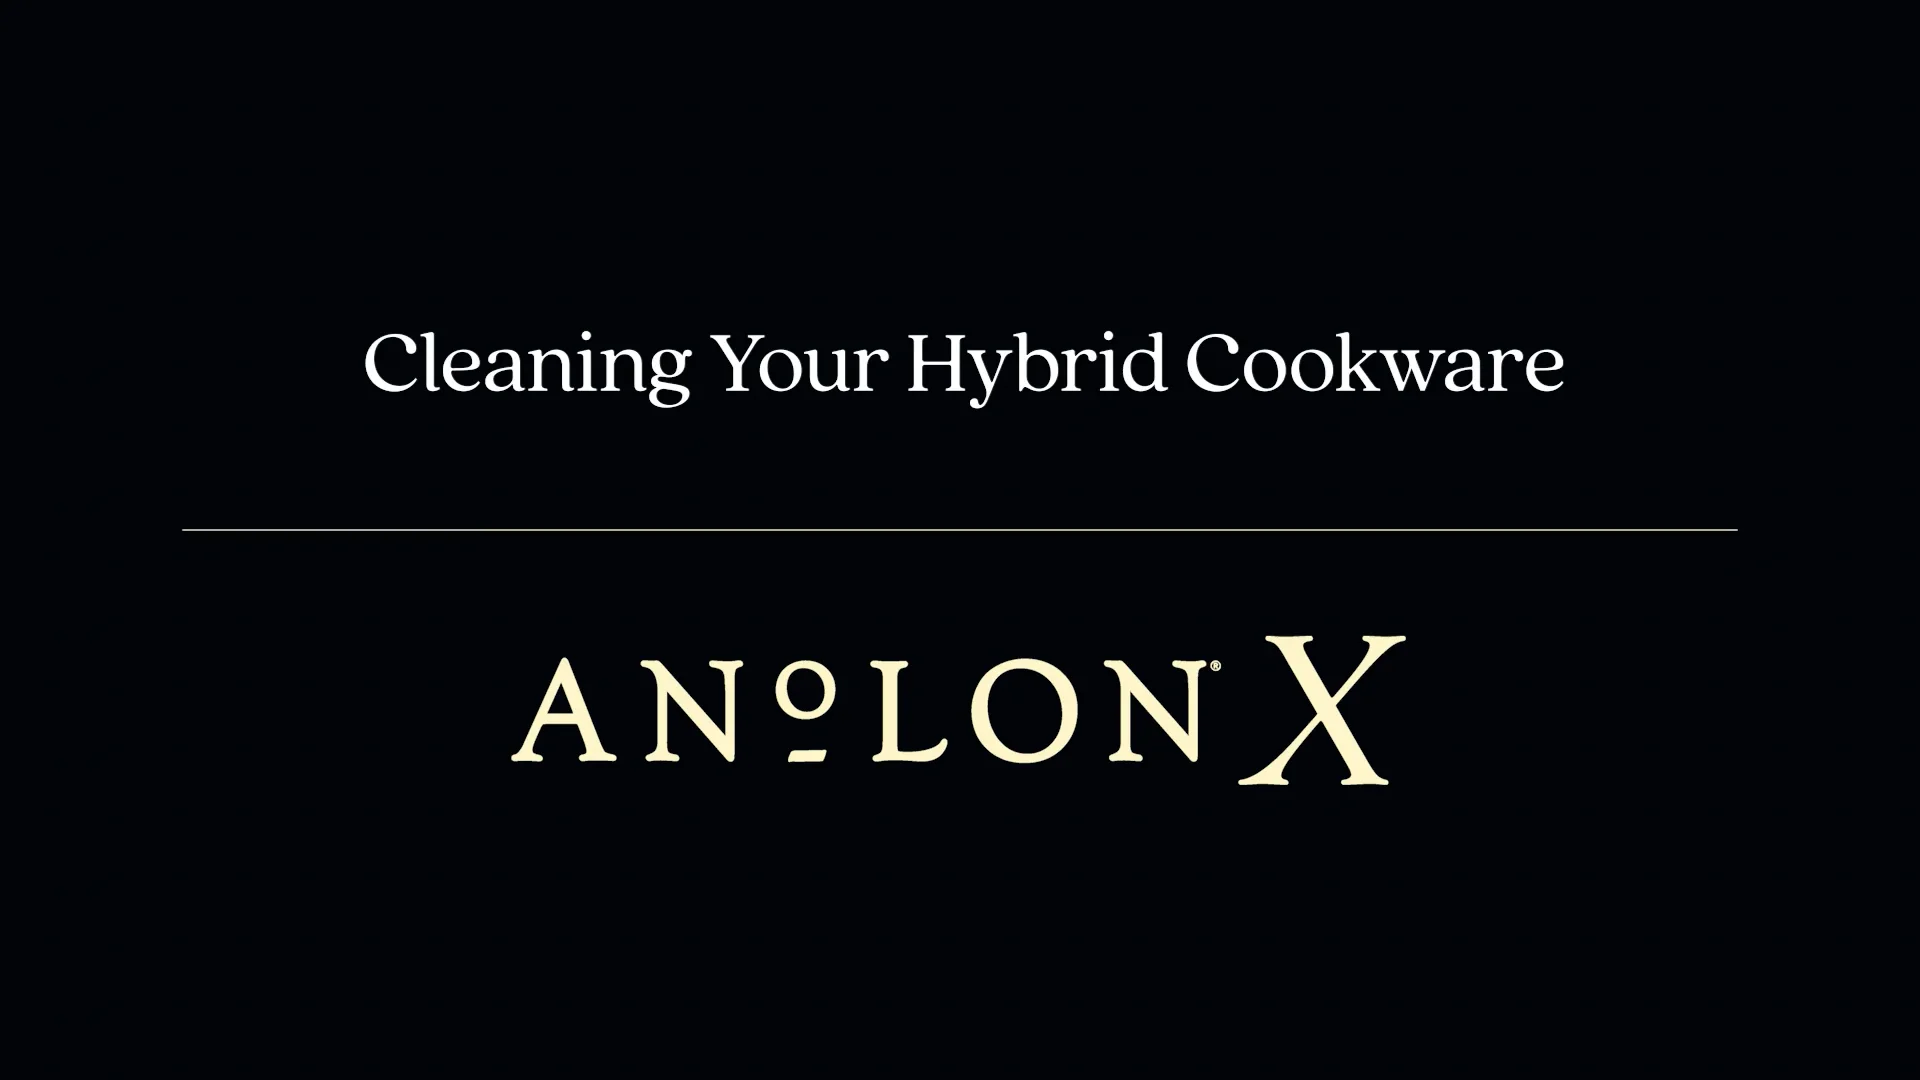 Cooking with Your AnolonX - Tricks & Tips 